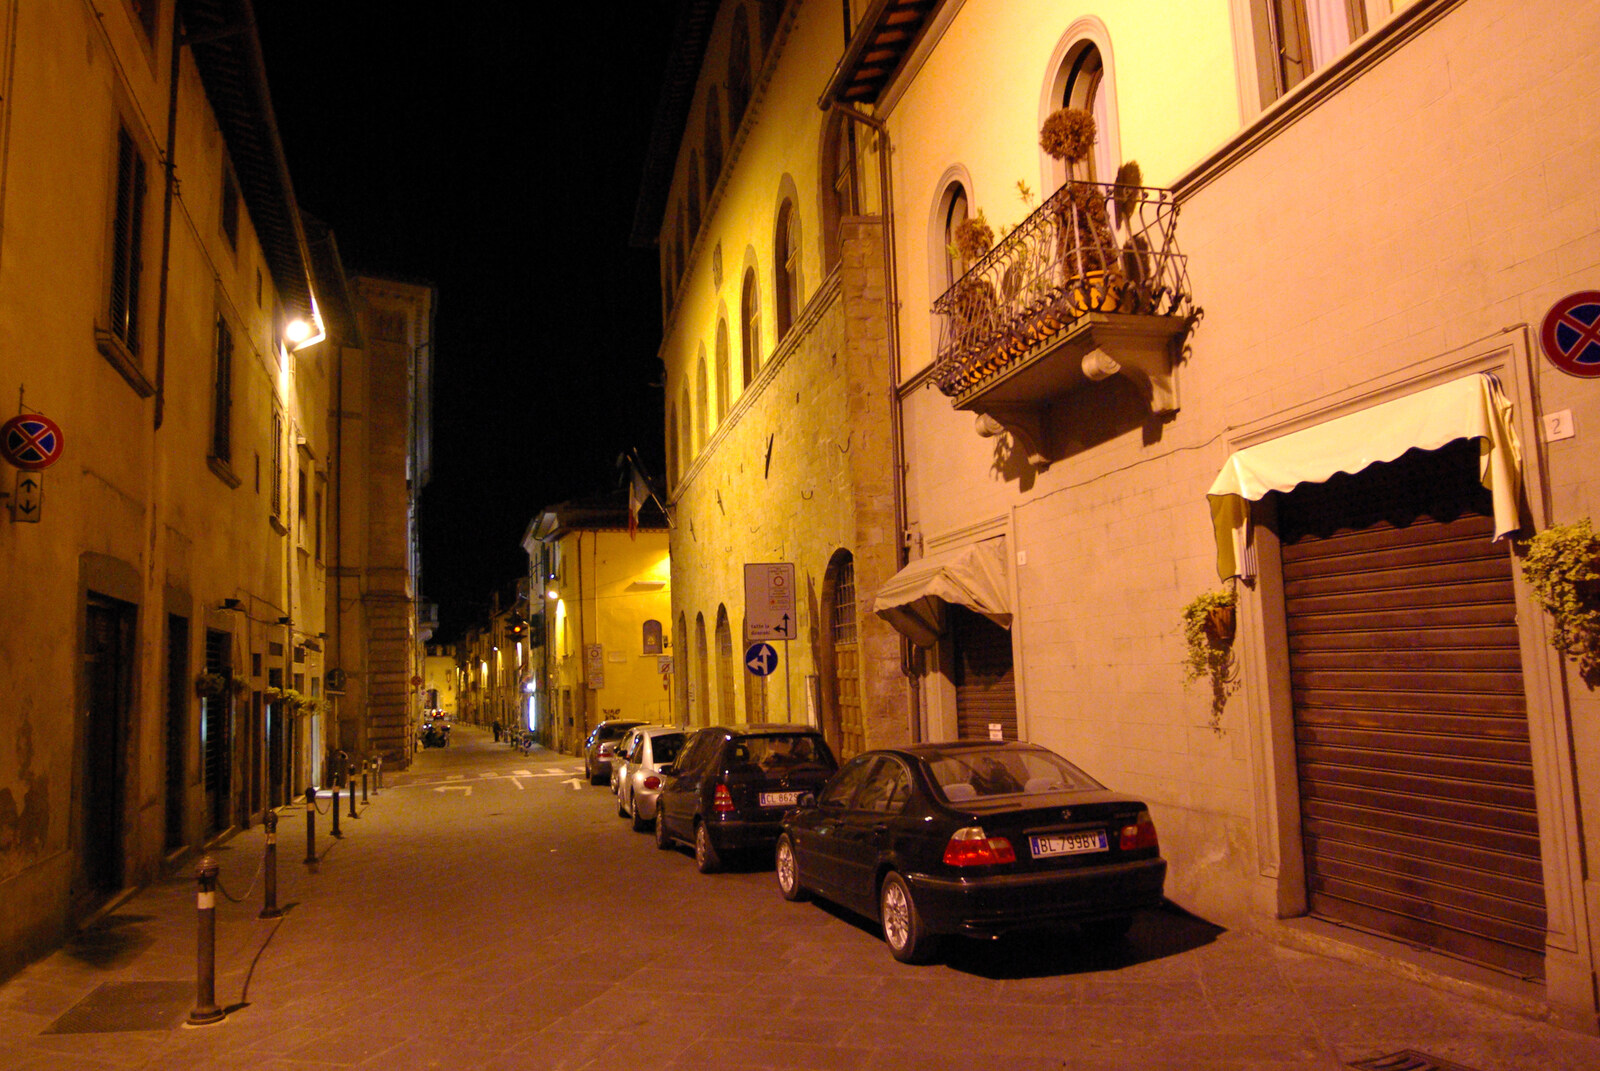 Quiet paved streets from Tenuta Il Palazzo in Arezzo, Tuscany, Italy - 22nd July 2008